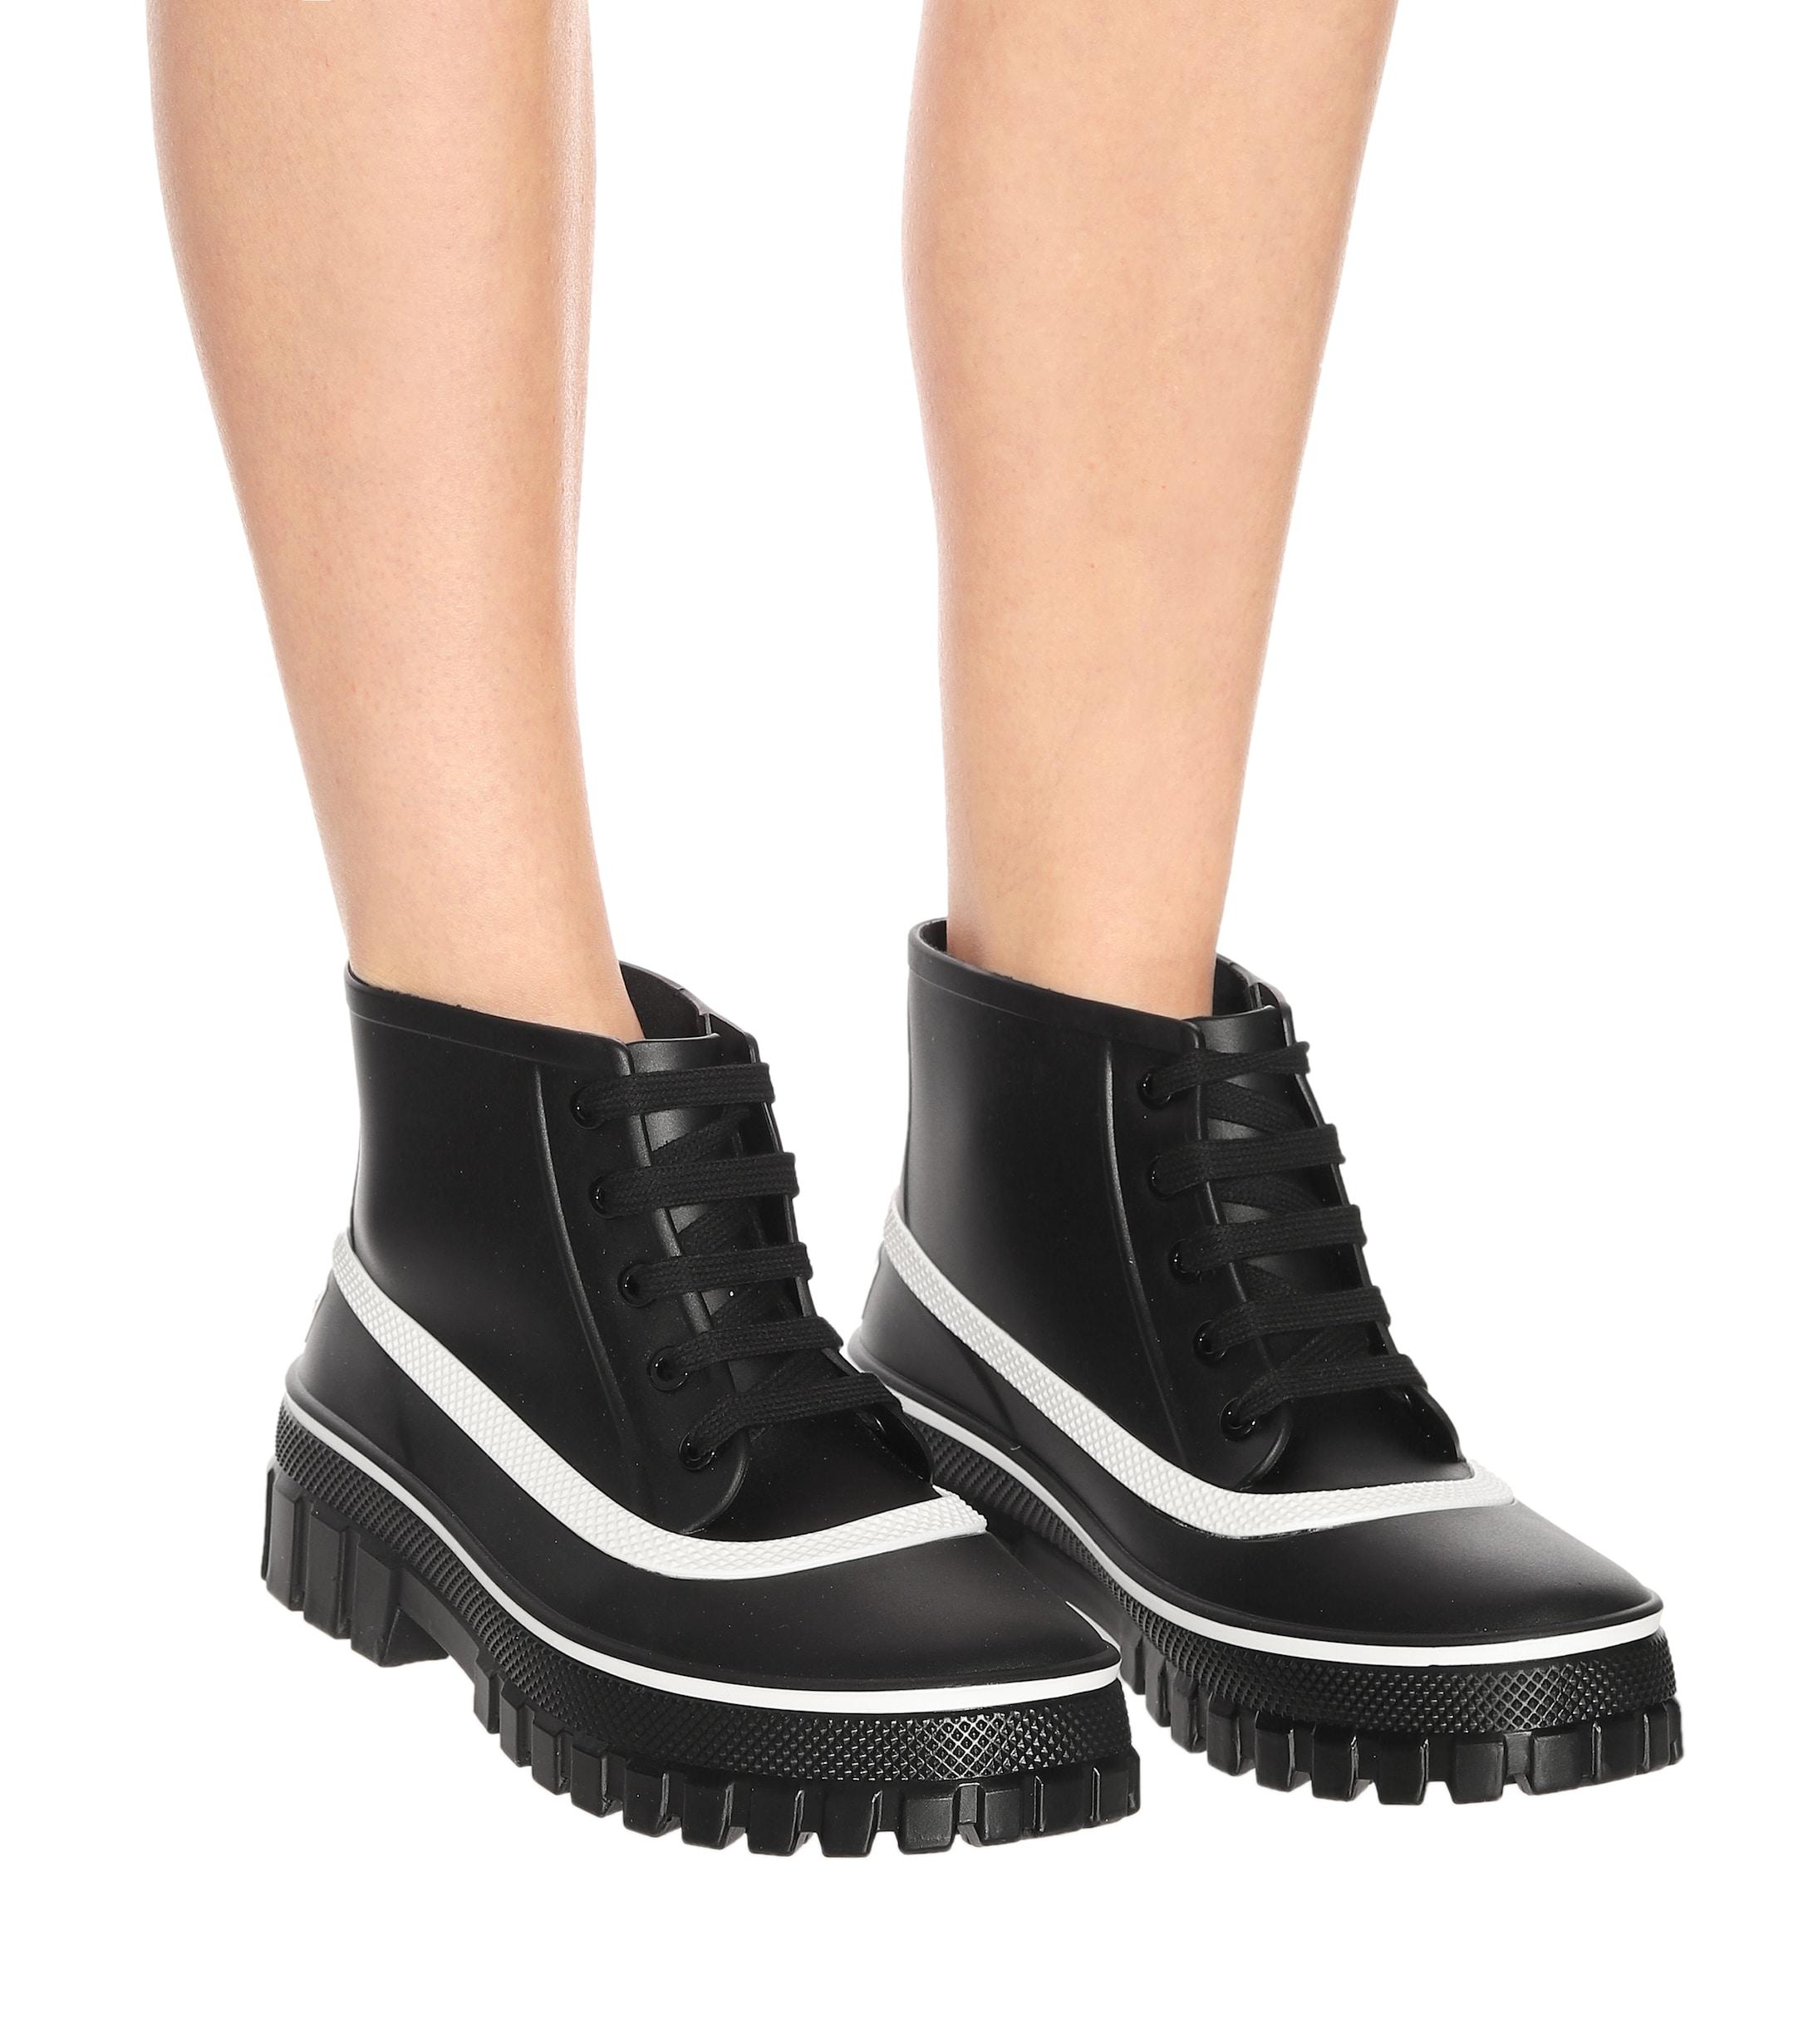 Givenchy Glaston Lace-up Rubber Rain Boots in Black | Lyst